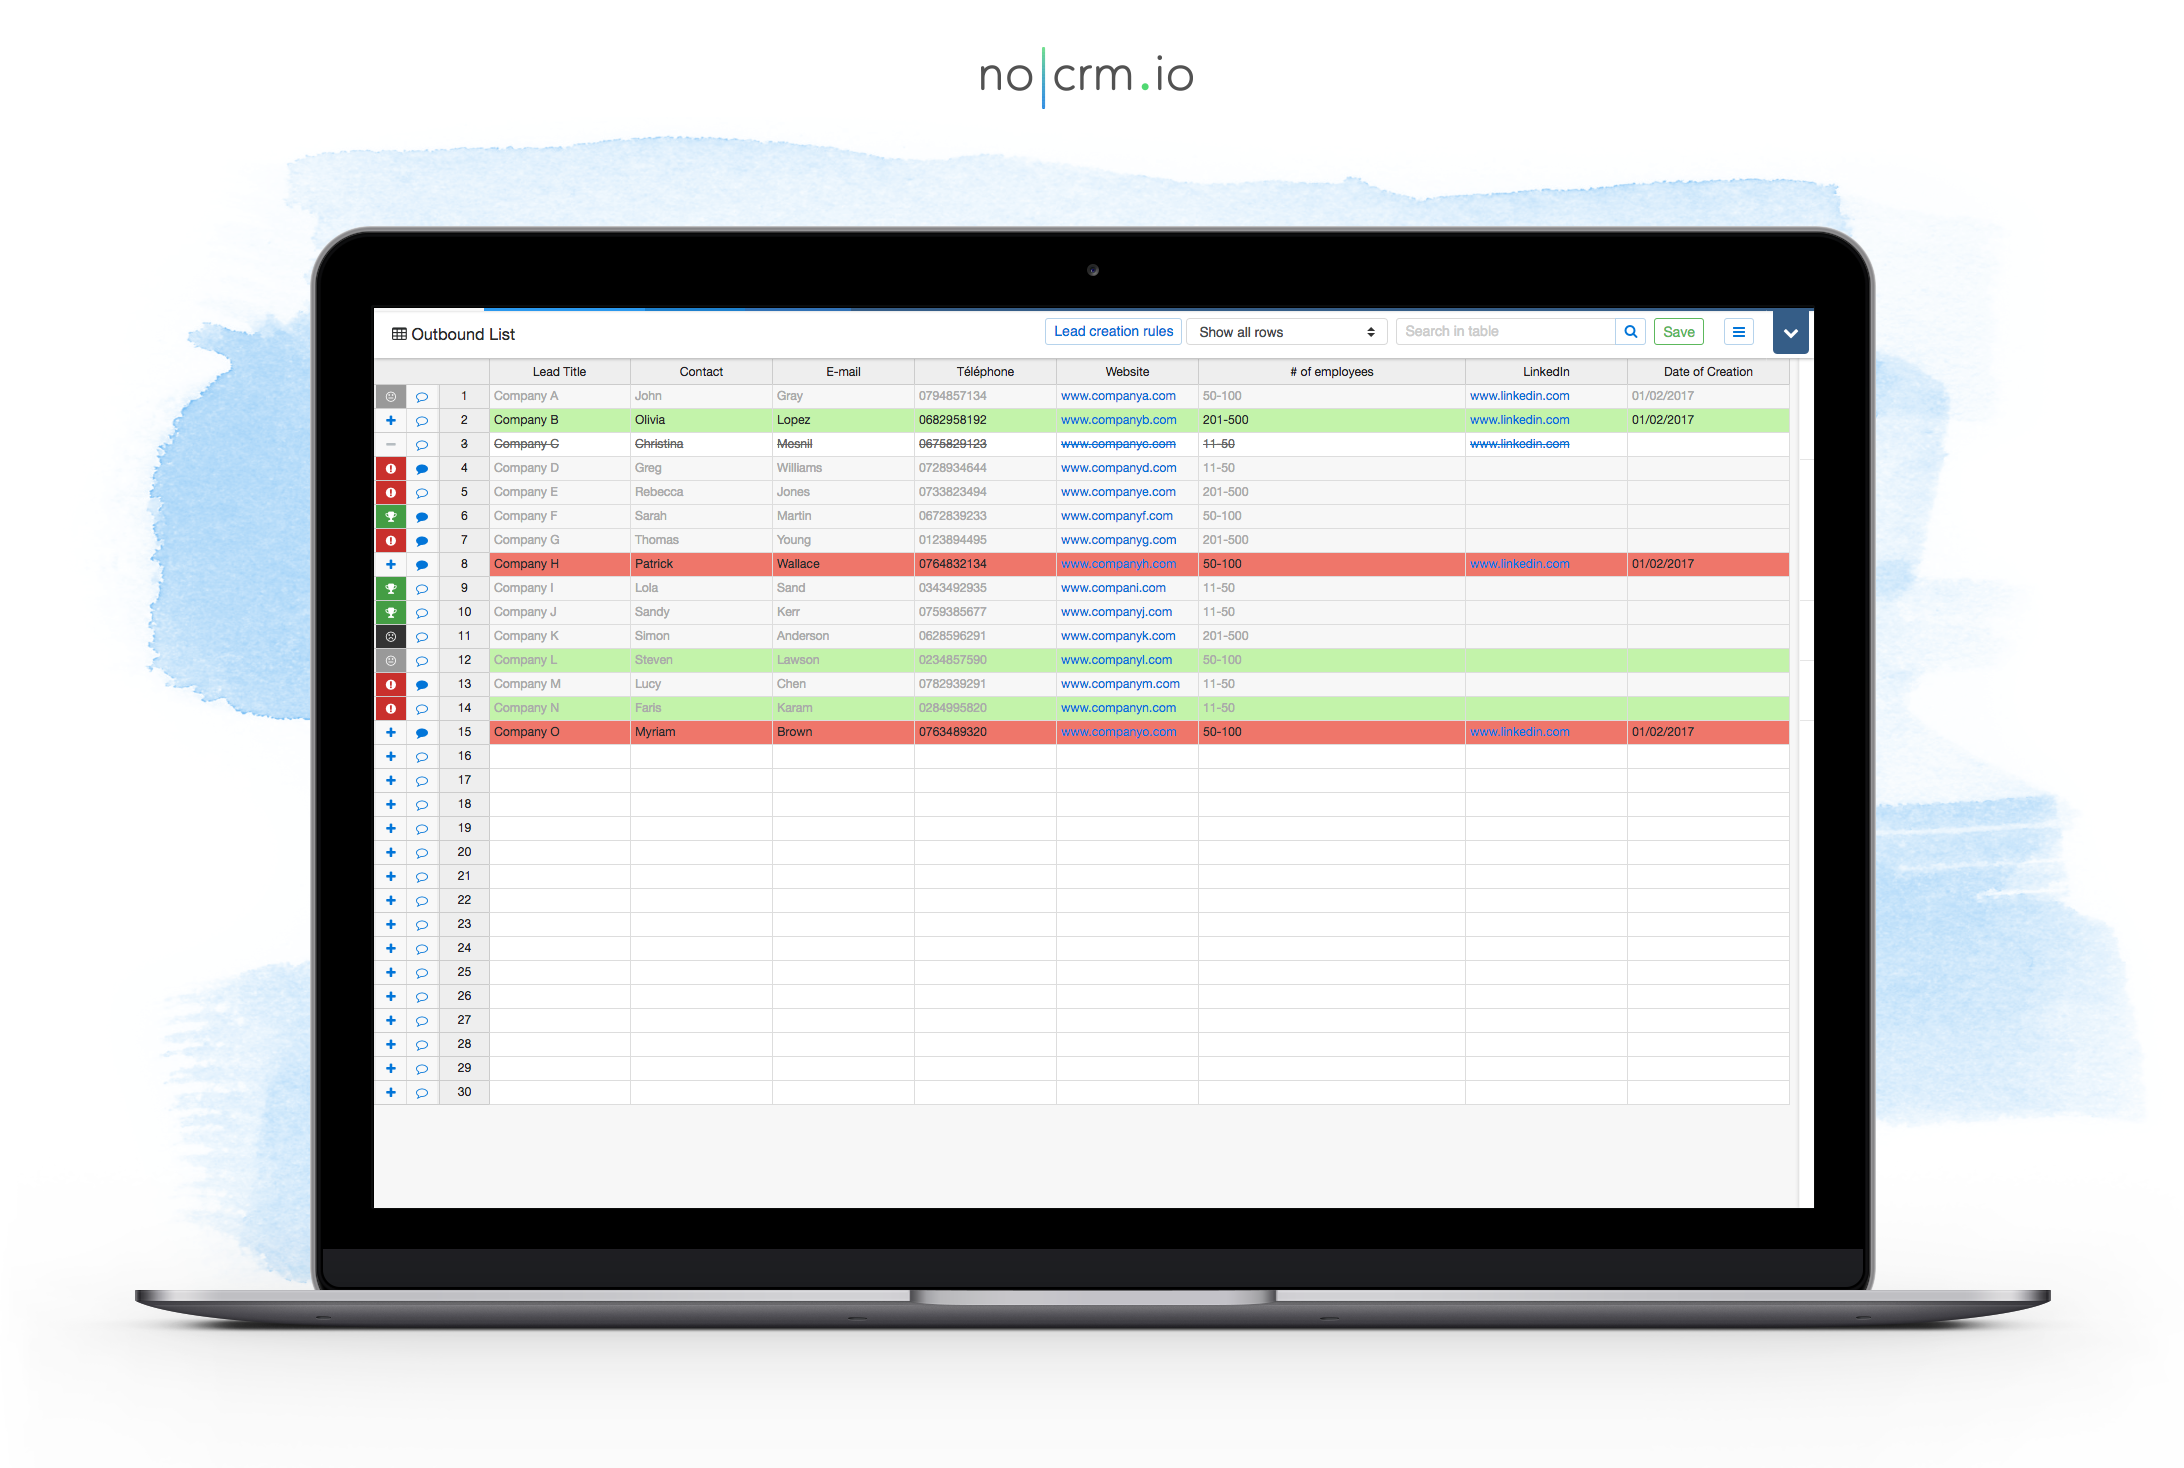 noCRM.io Software - View the prospecting list